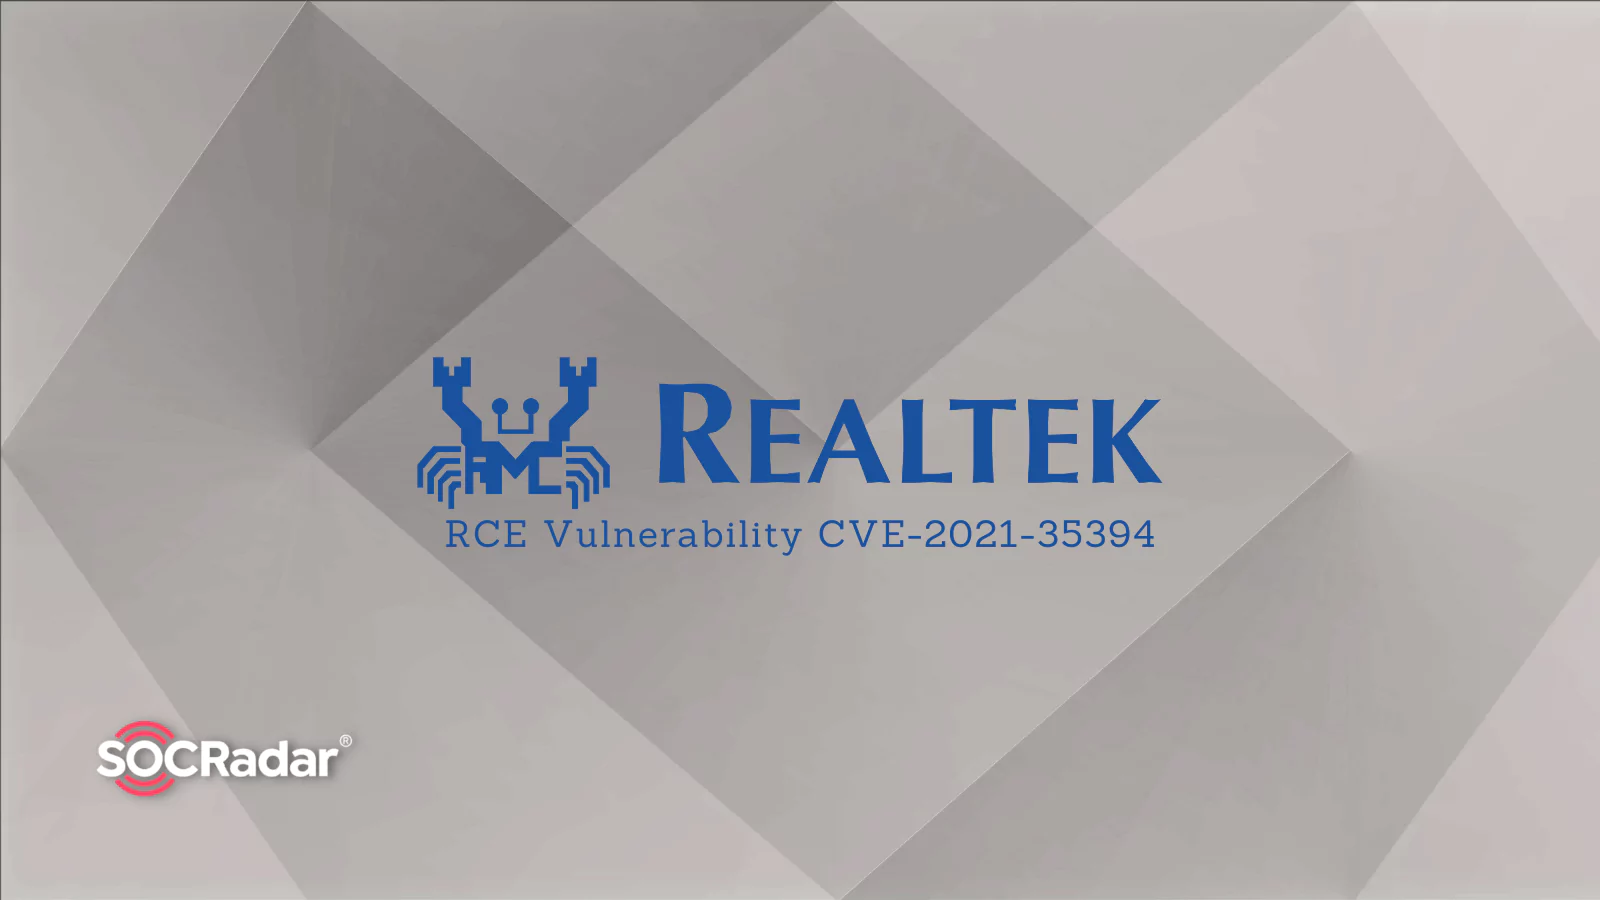 SOCRadar® Cyber Intelligence Inc. | 134M Exploit Attempts: Realtek RCE Vulnerability Targeted in Large-Scale Attacks